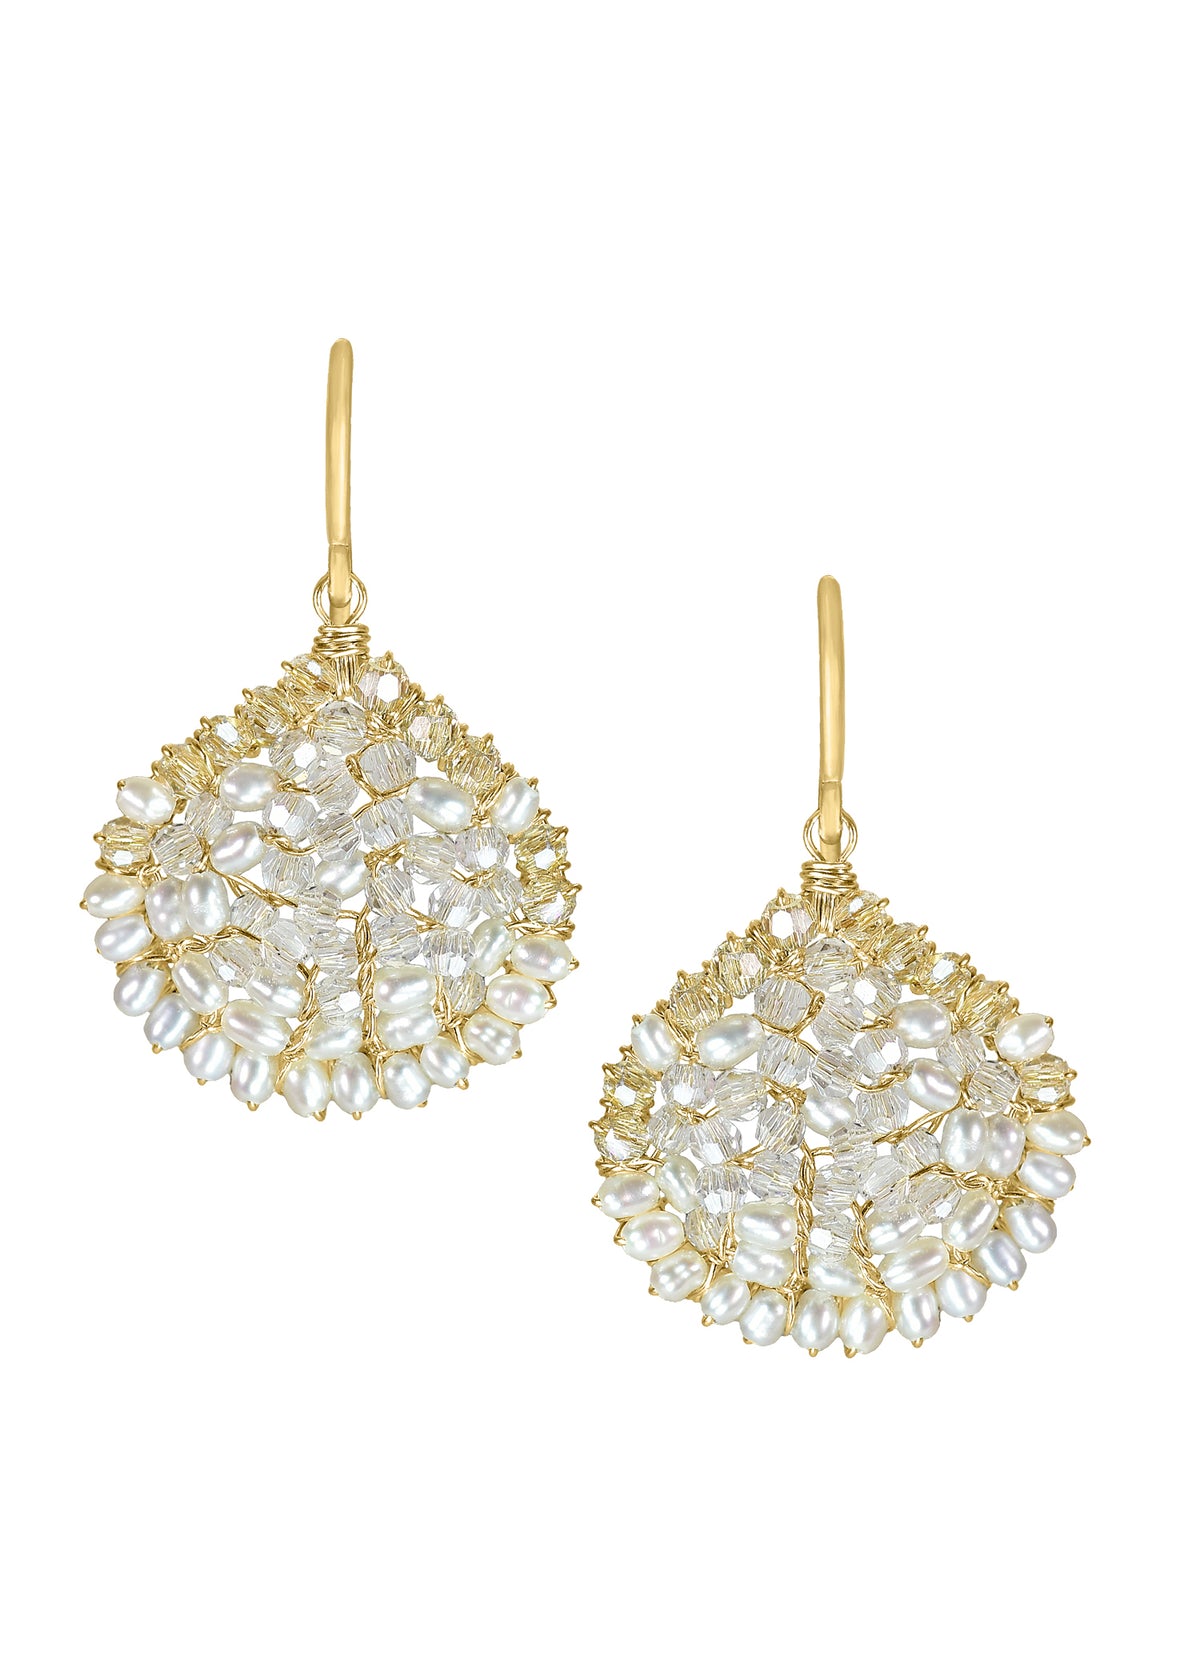 Crystal Freshwater pearl 14k gold fill Earrings measure 1-1/8&quot; in length (including the ear wires) and 5/8&quot; in width at the widest point Handmade in our Los Angeles studio